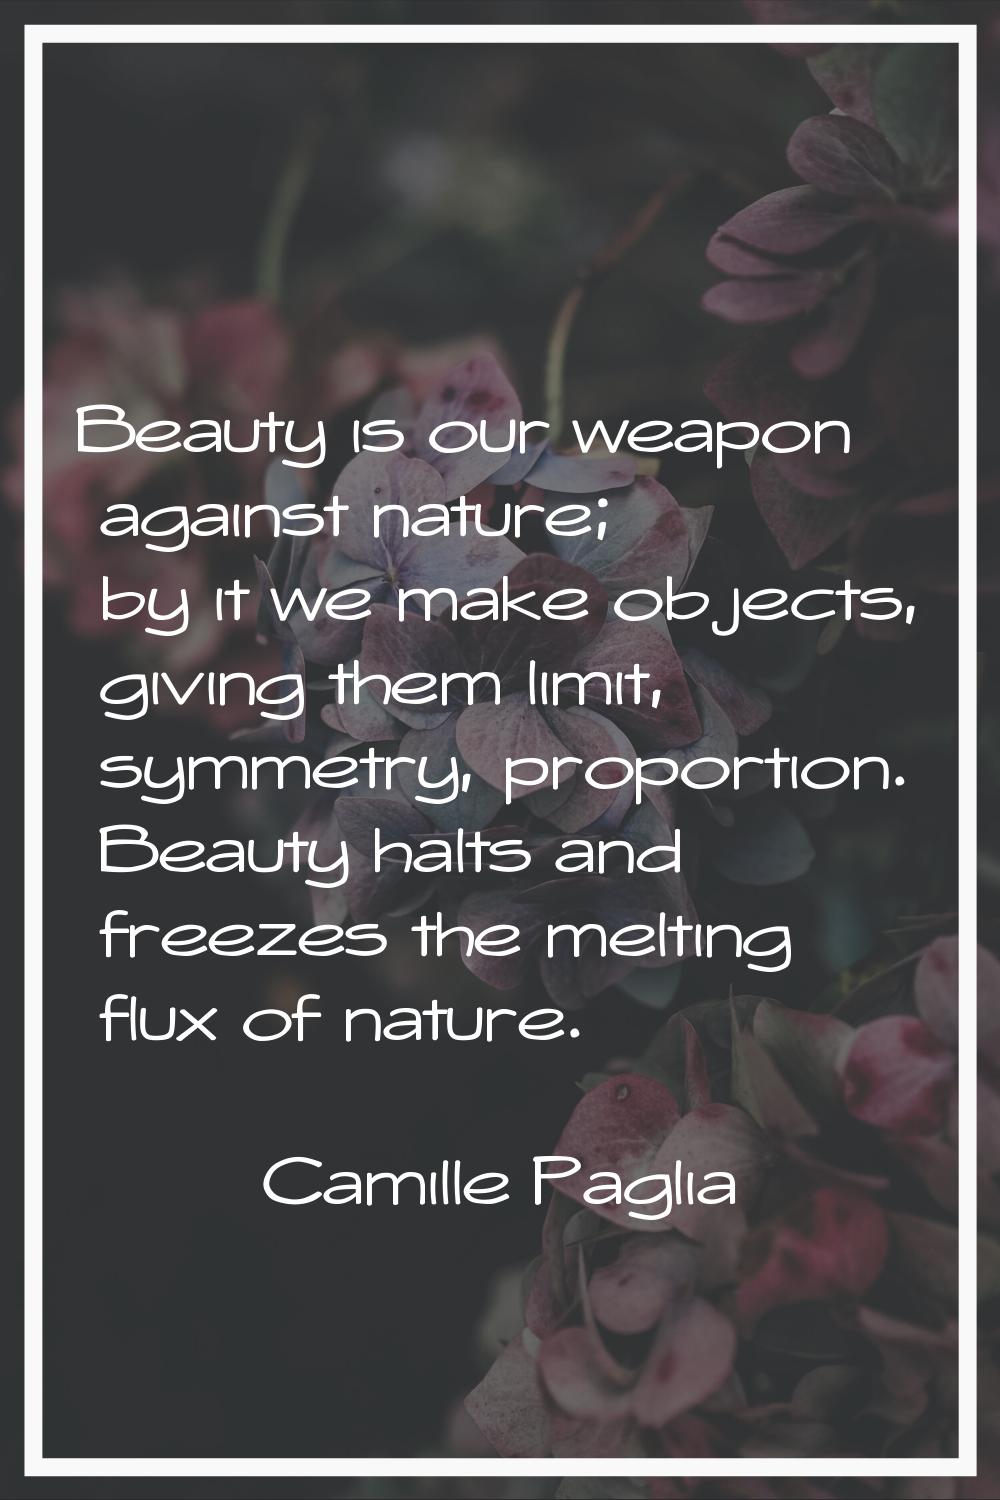 Beauty is our weapon against nature; by it we make objects, giving them limit, symmetry, proportion